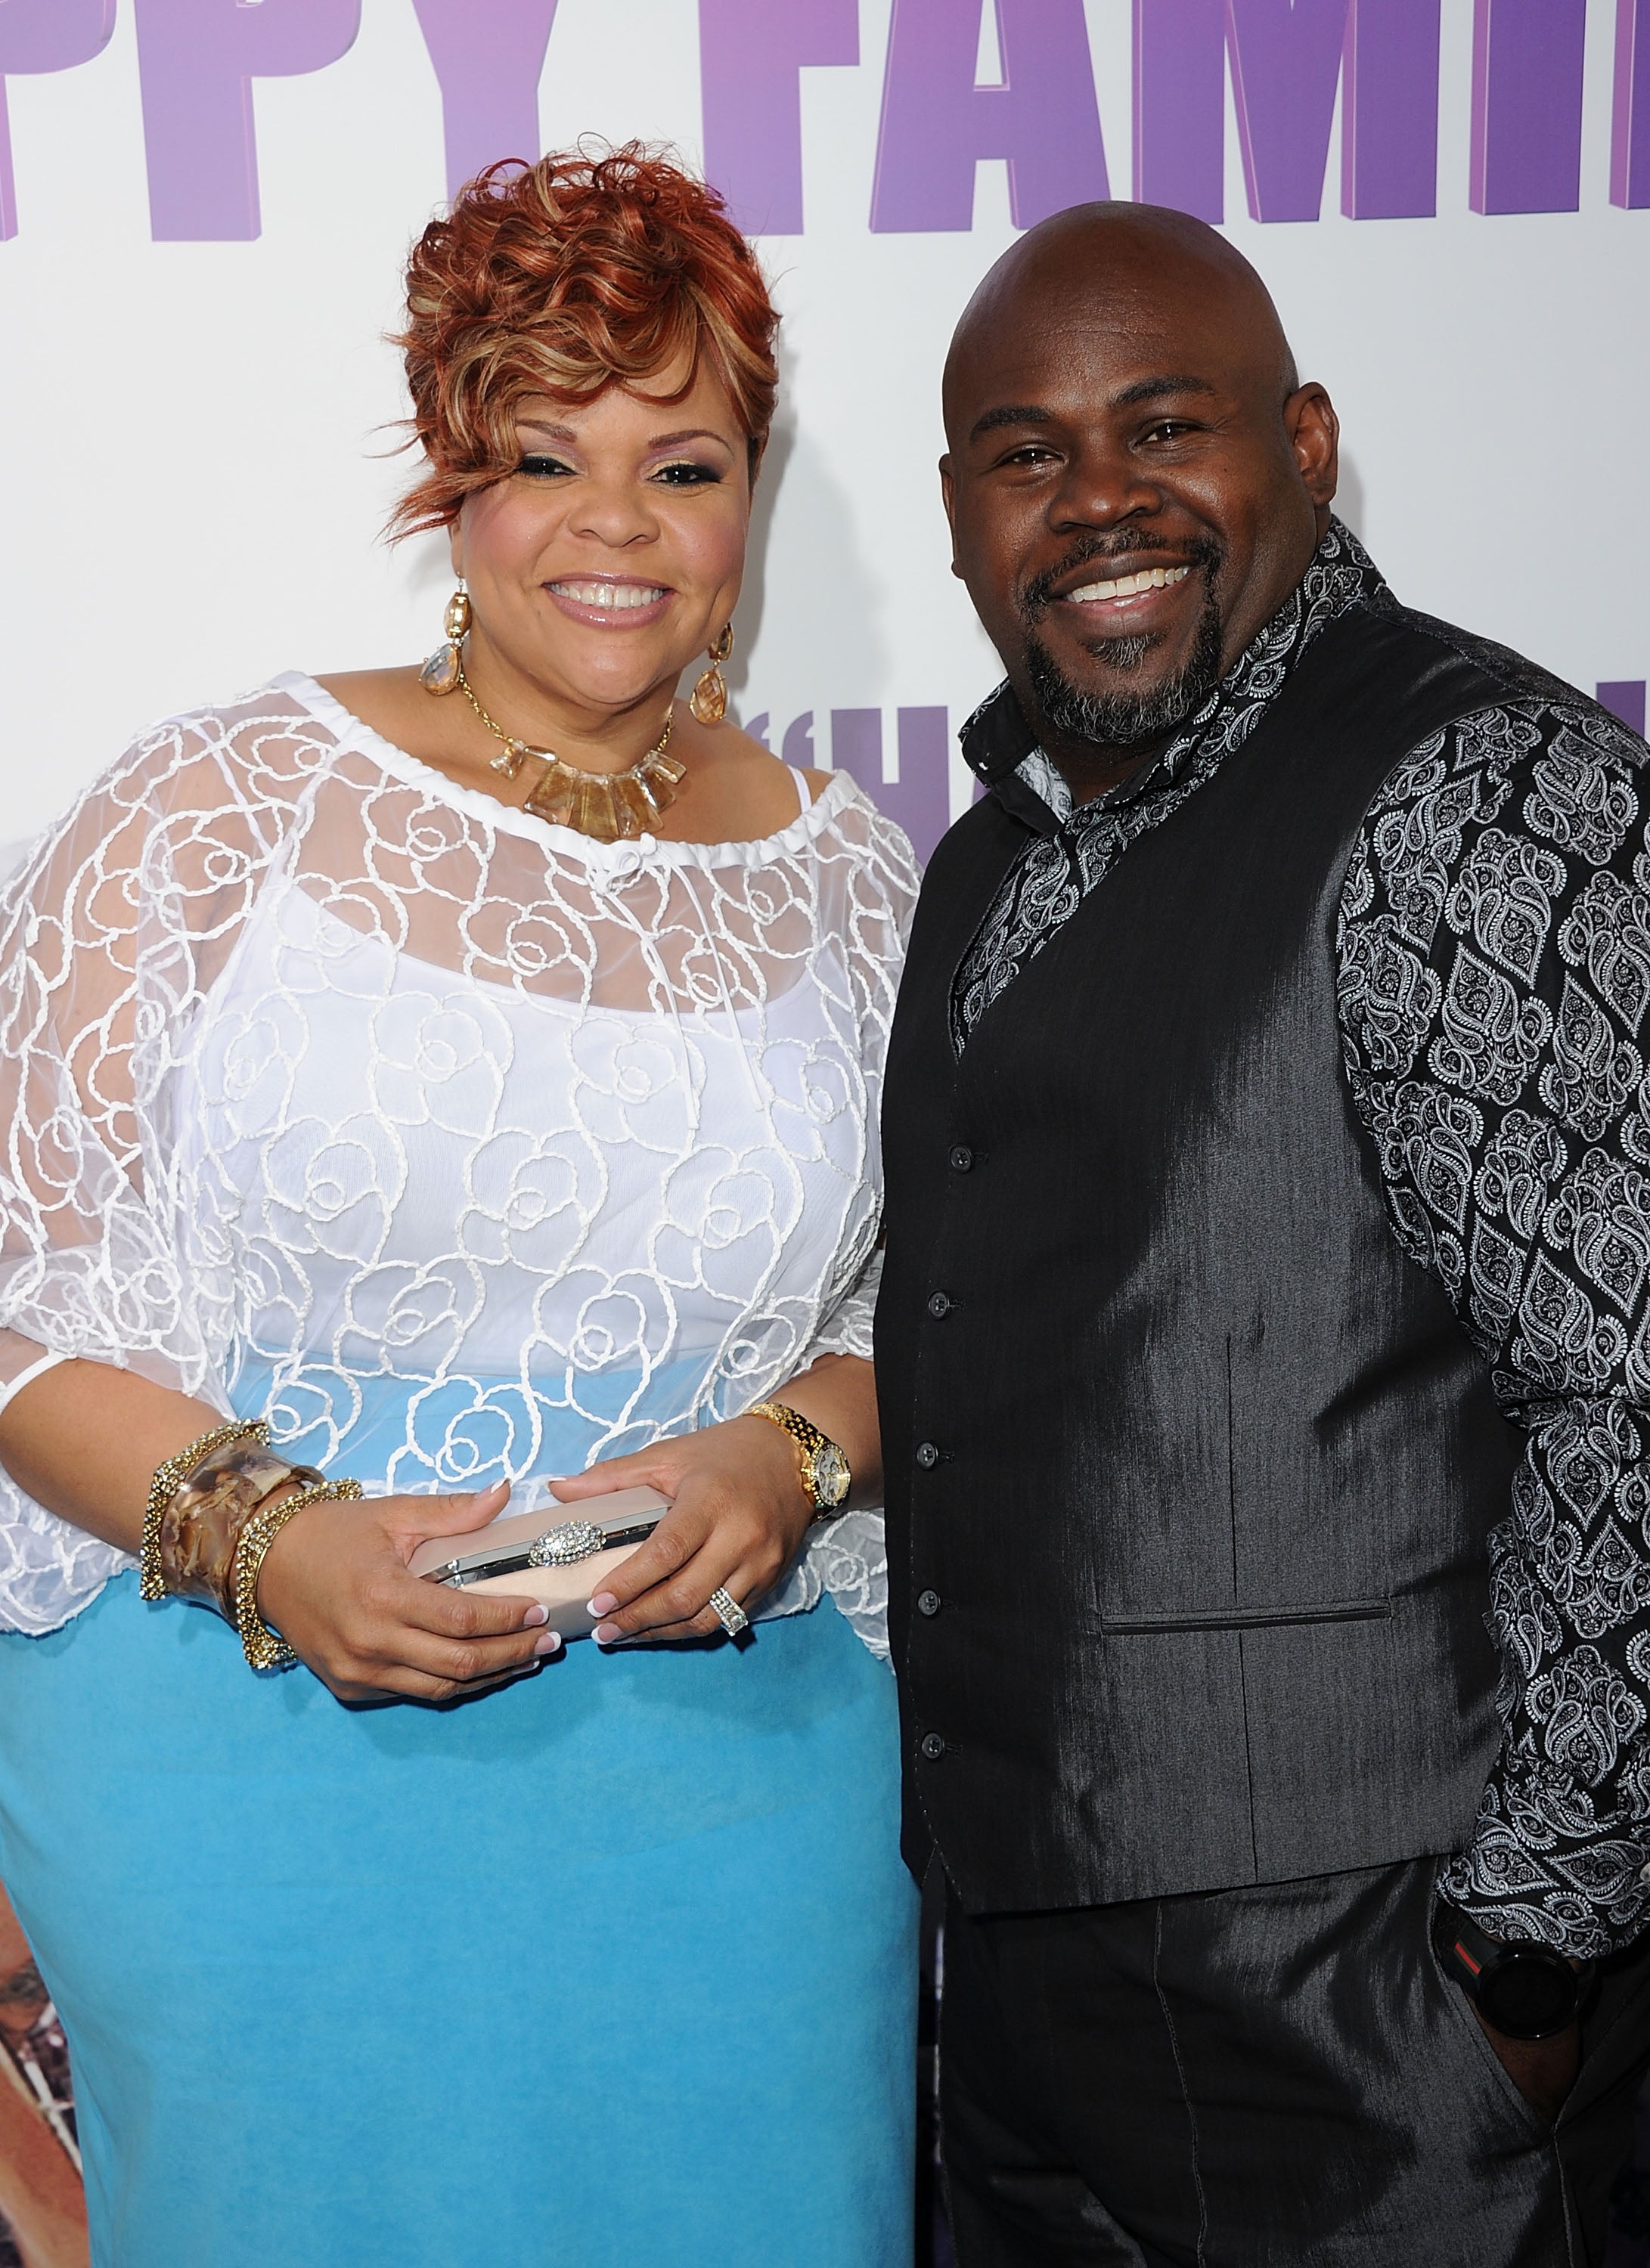 A Look At David And Tamela Mann's Love Through The Years
